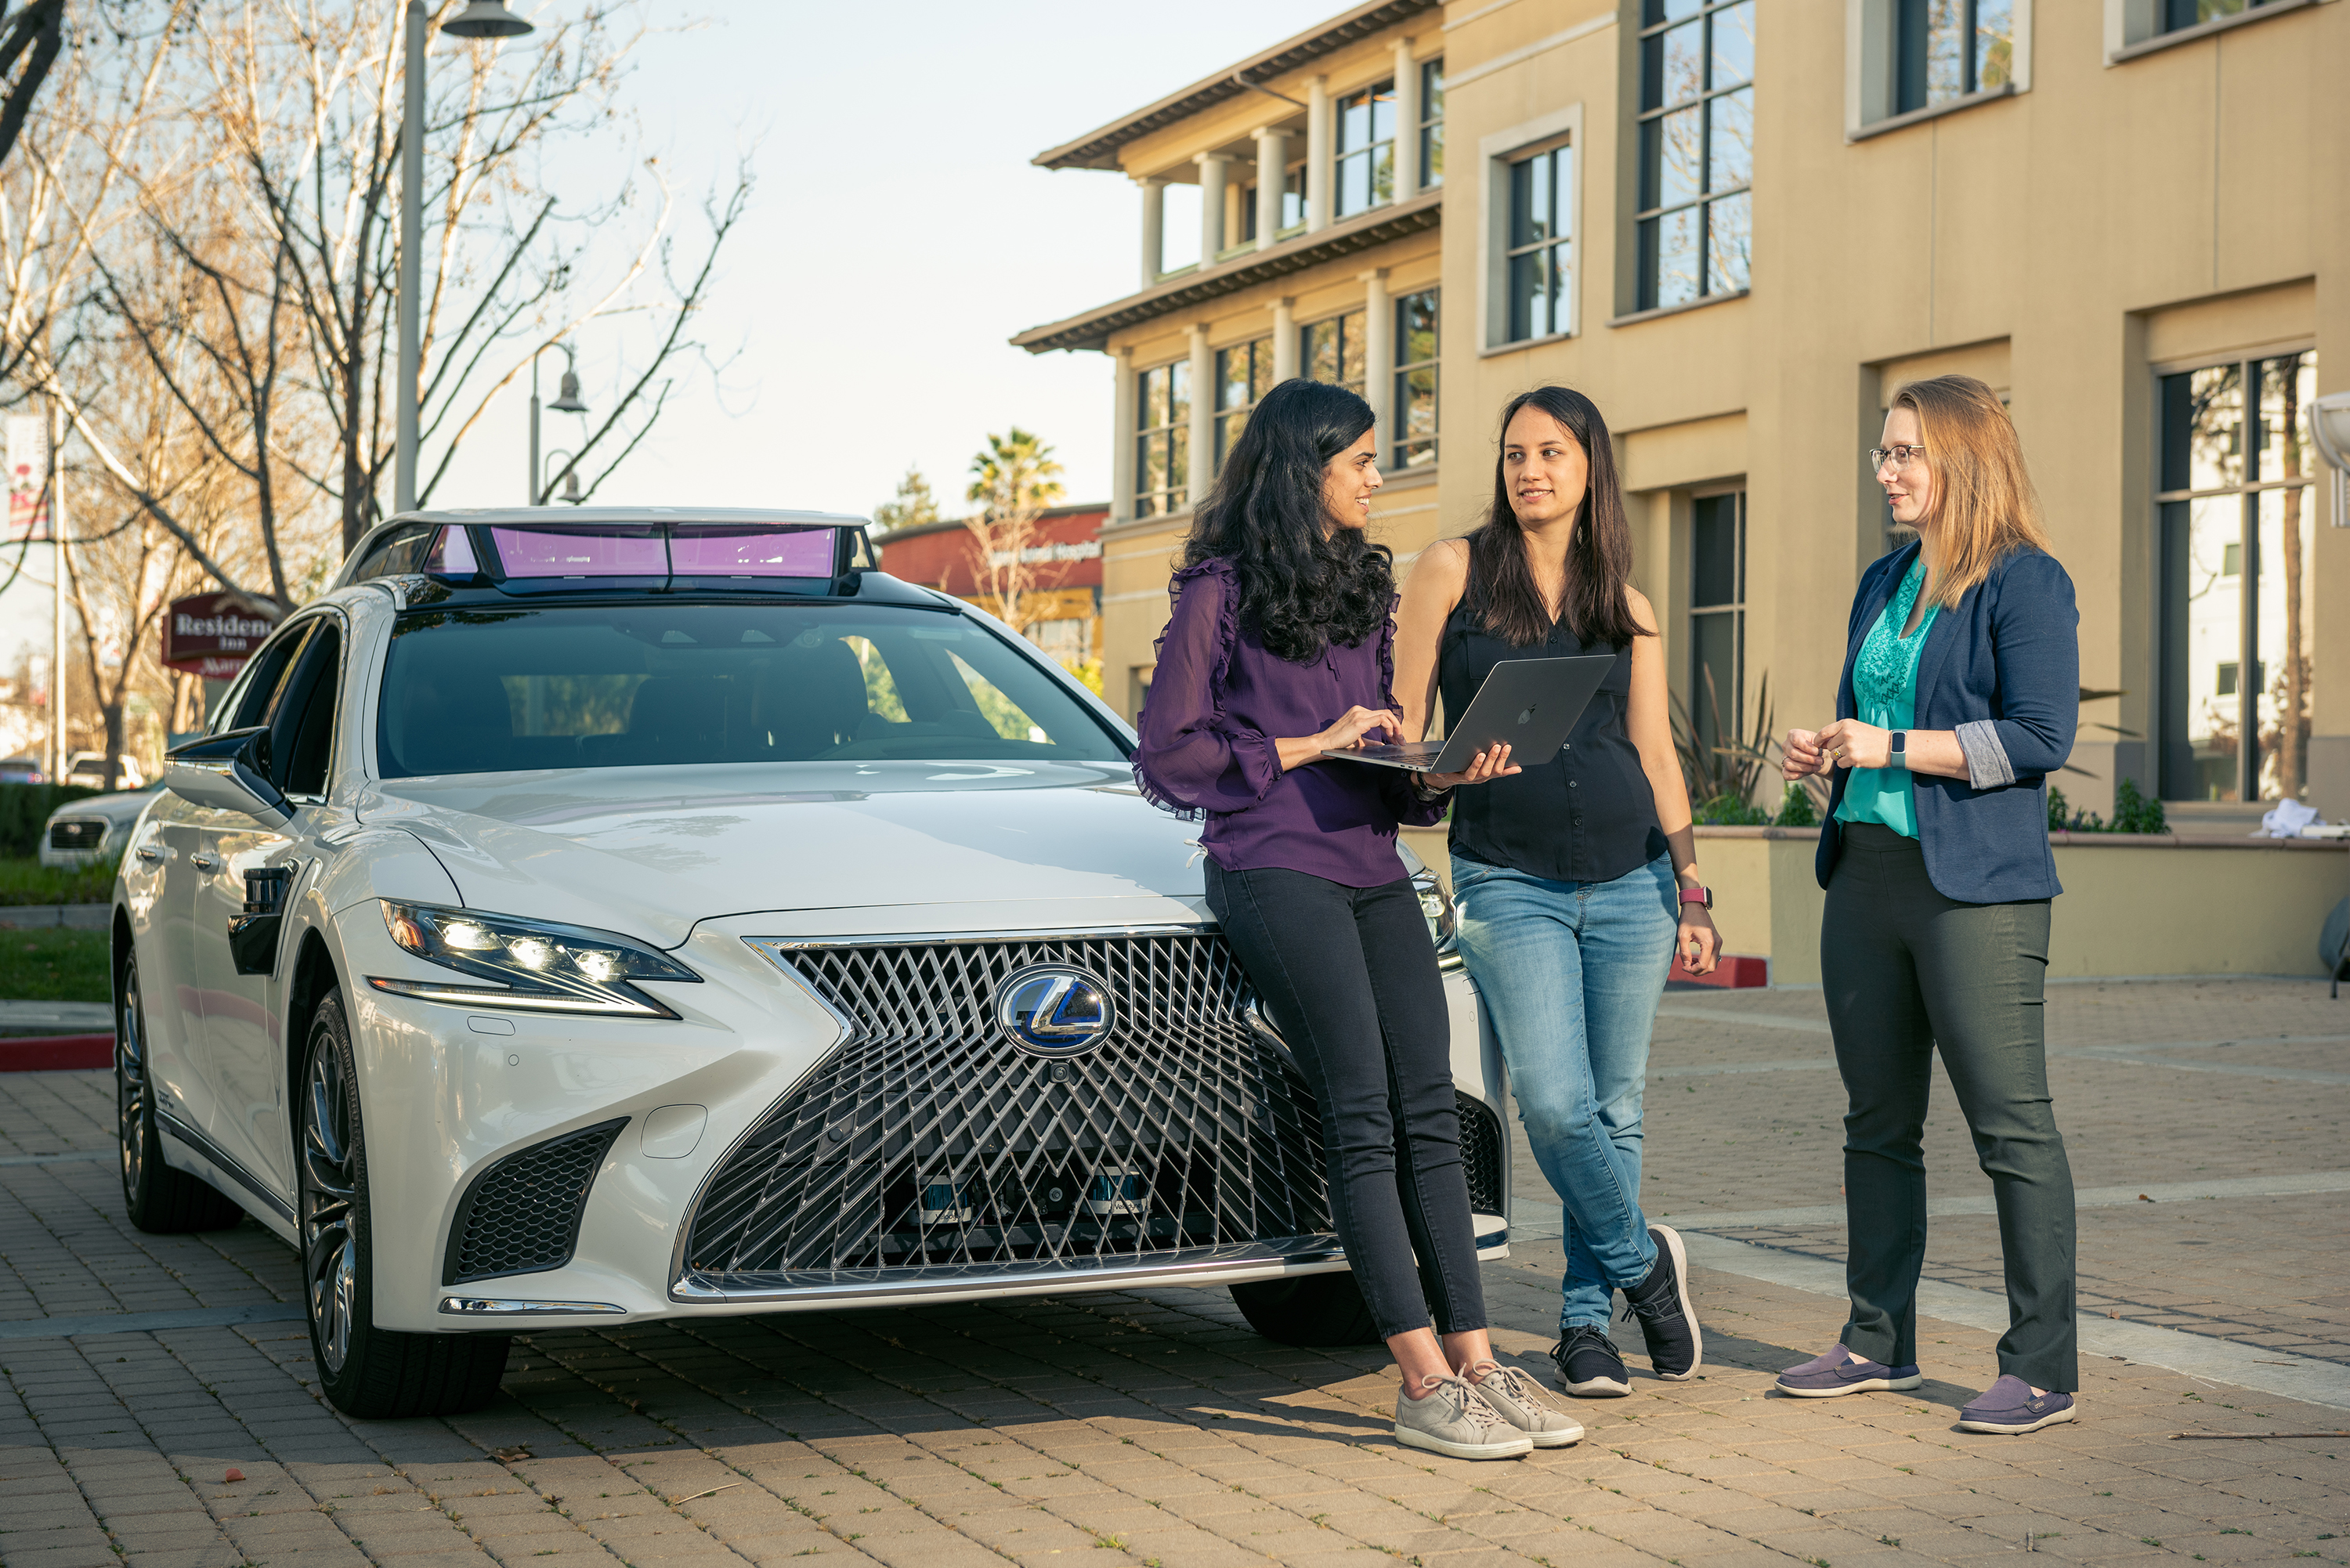 Three women standing next to a Lexus. One of them is holding a laptop.